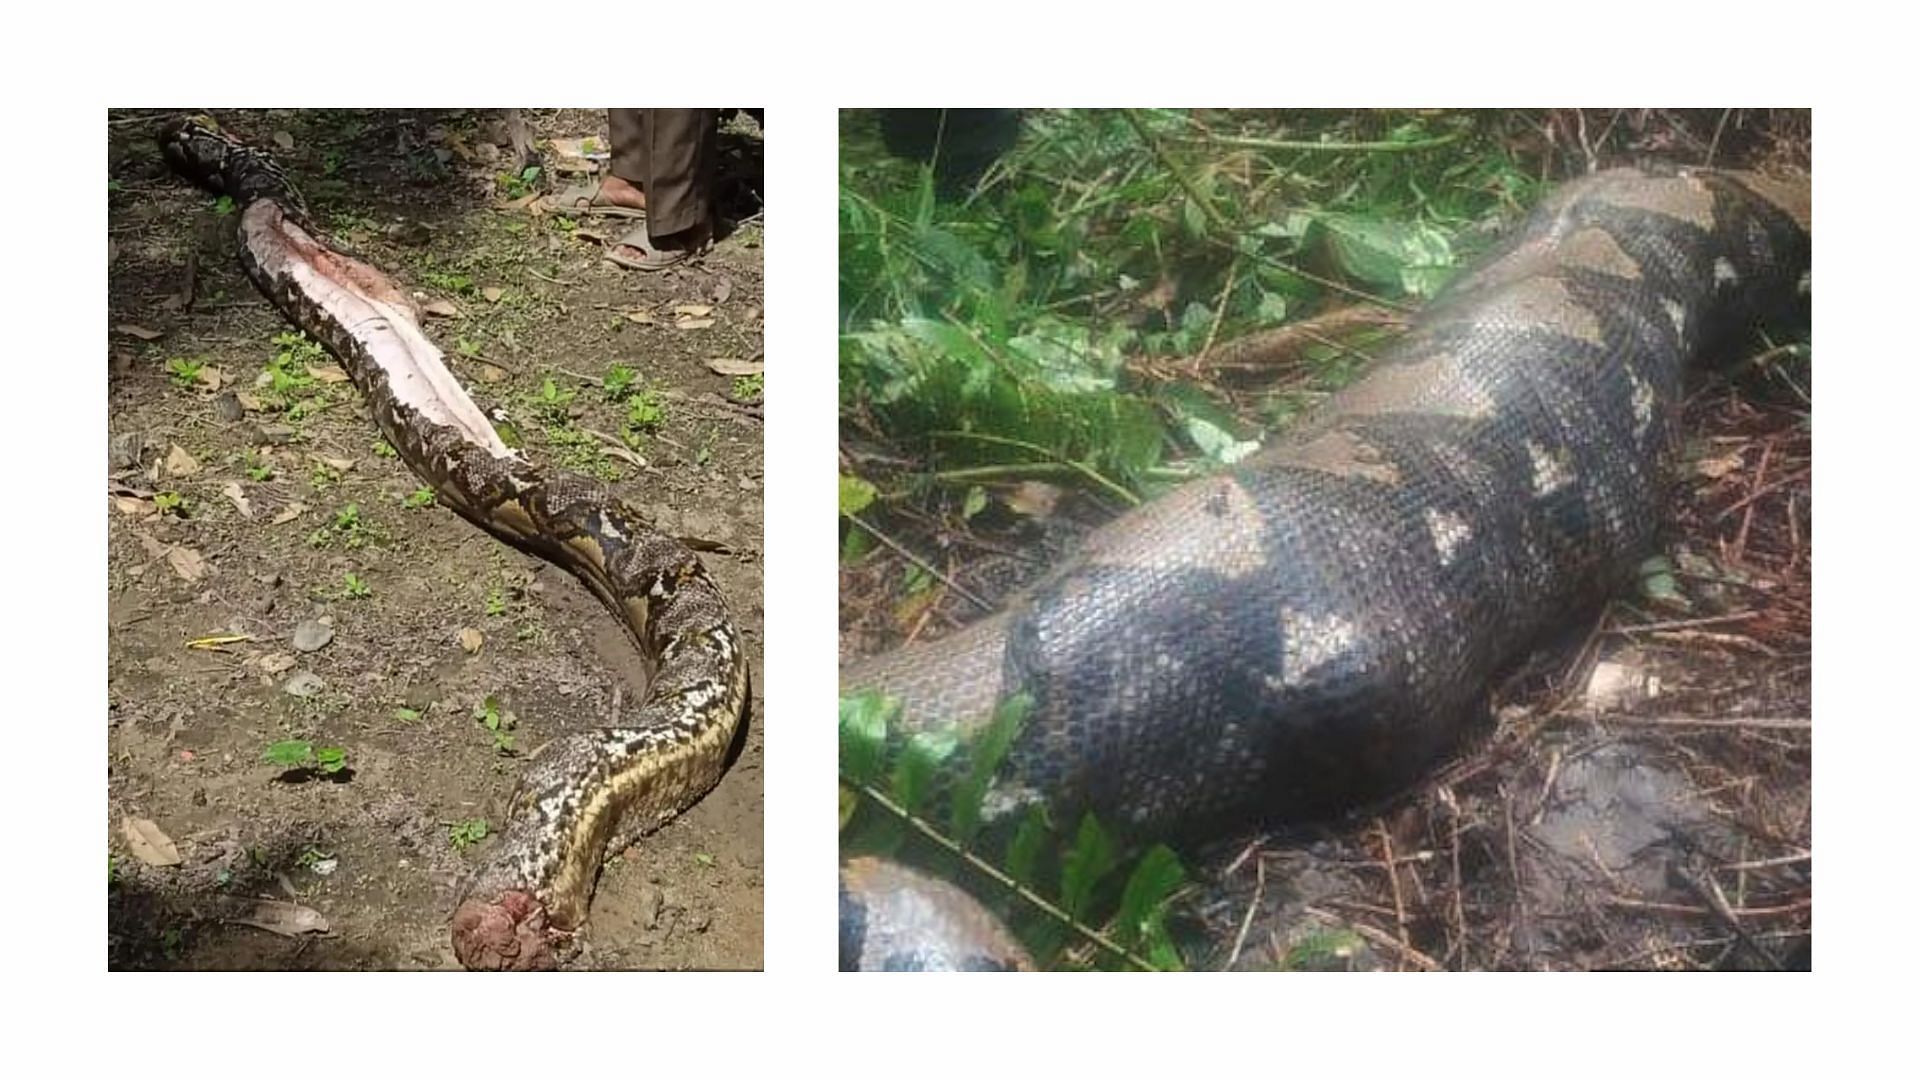 The snake was cut open and the woman was found inside (image via Jambi Tribune)